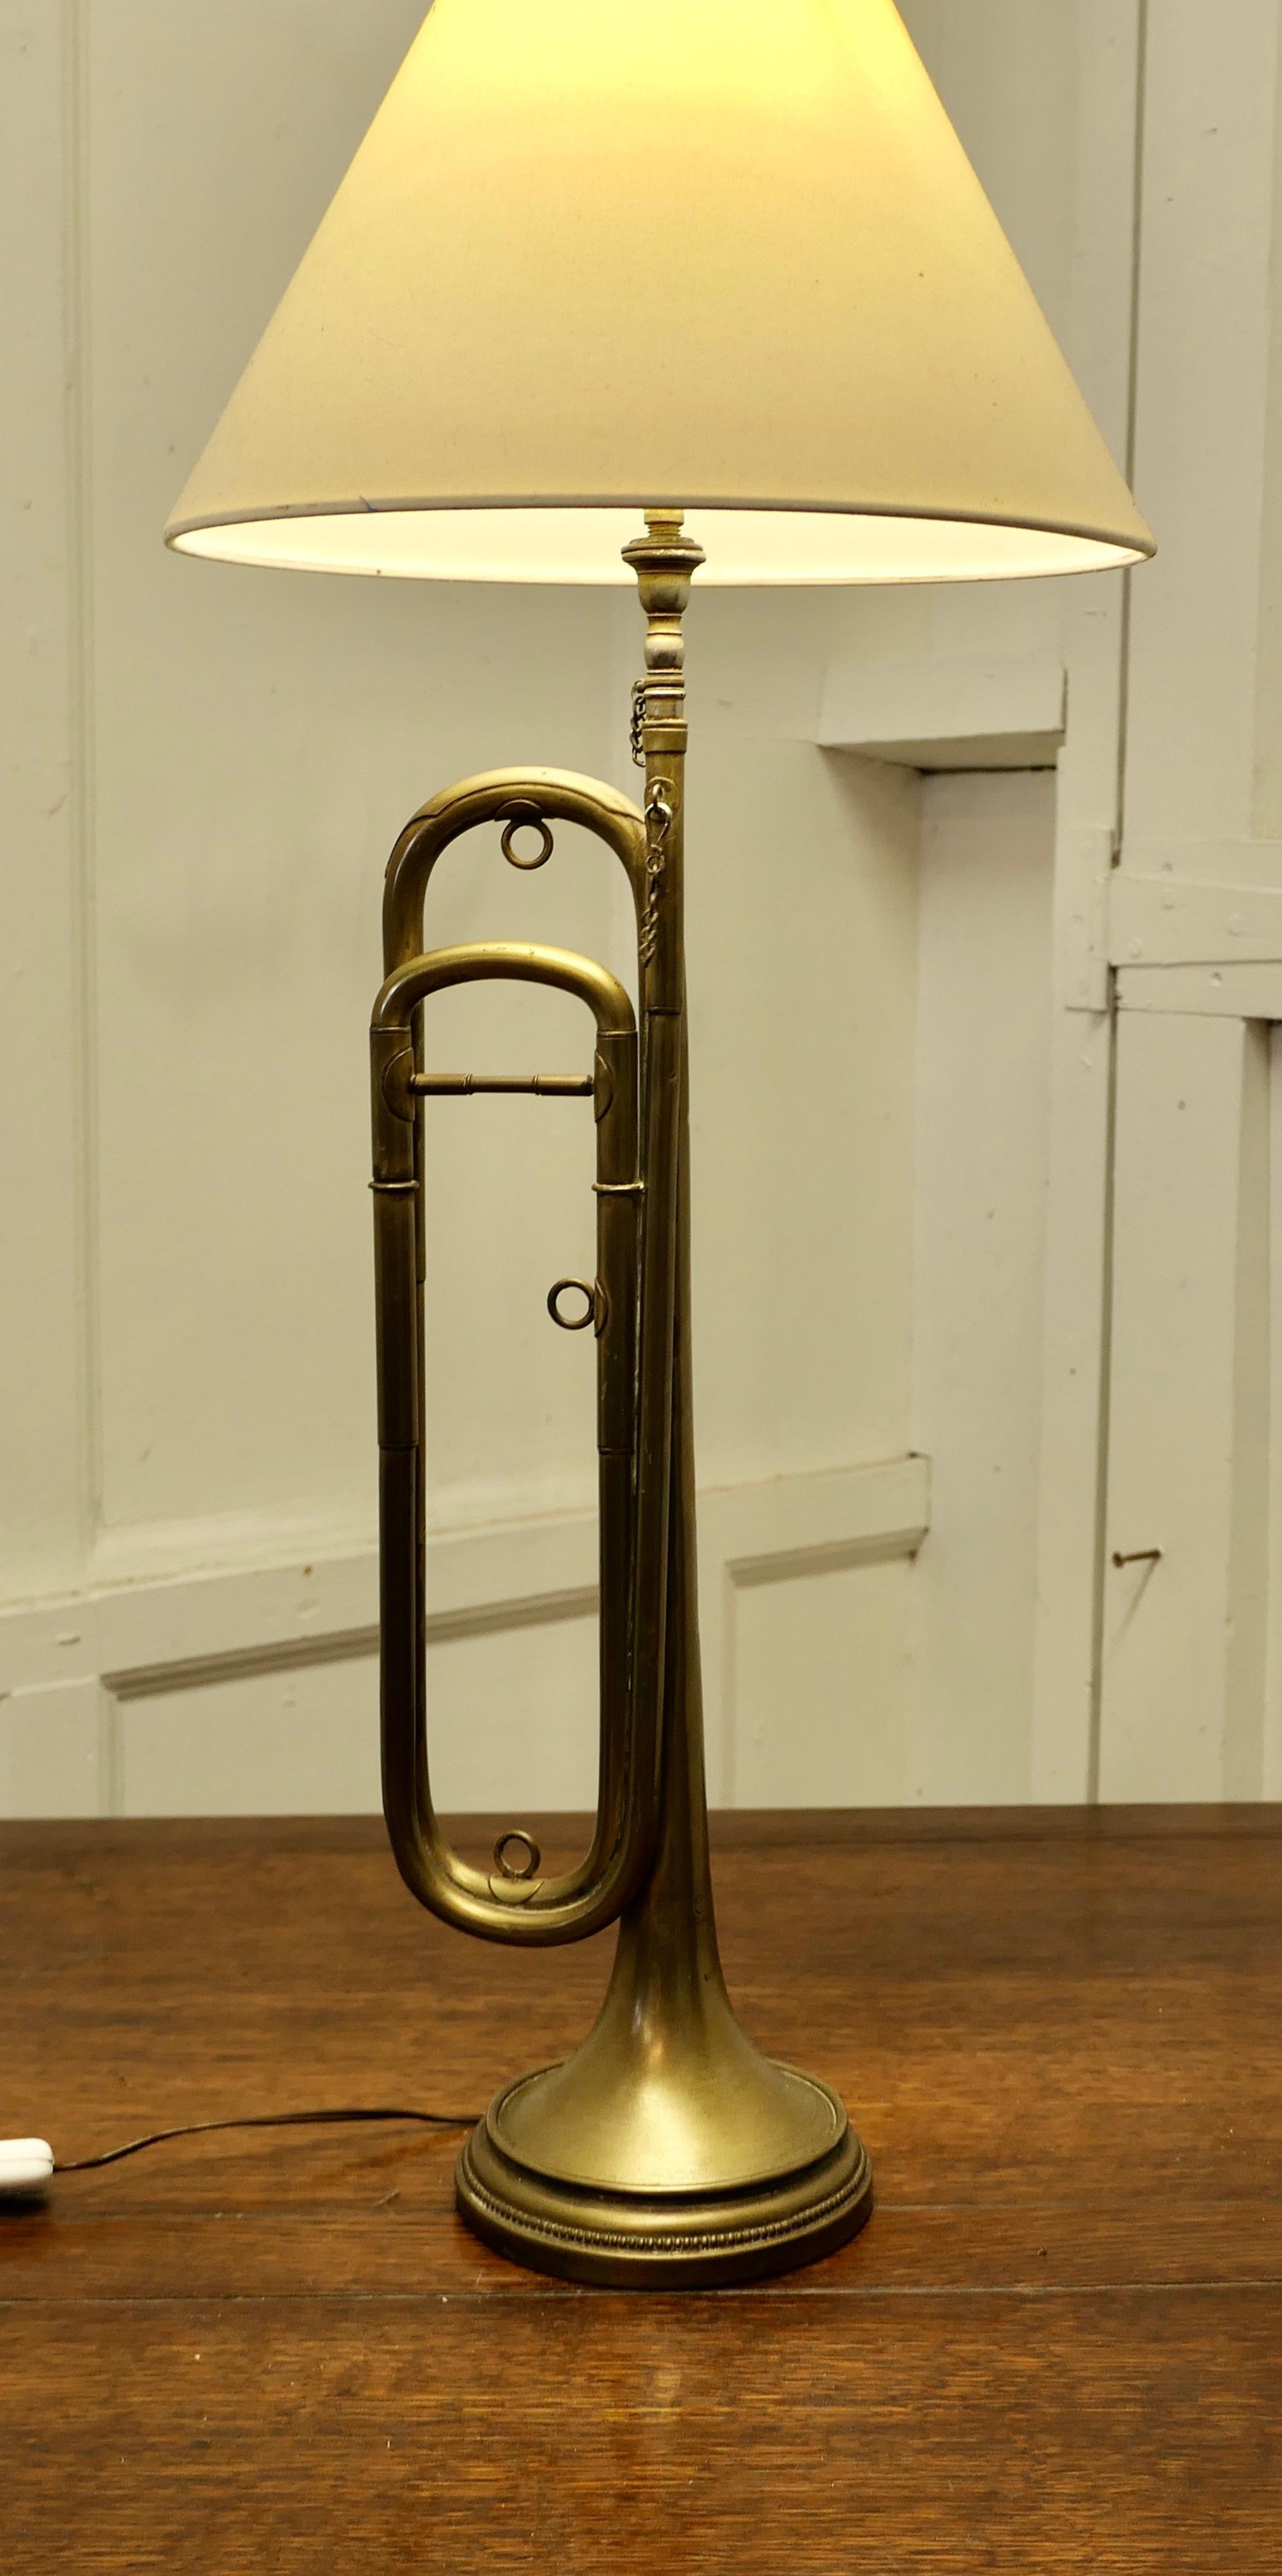 Quirky Brass Table Lamp Made from a Trumpet In Good Condition For Sale In Chillerton, Isle of Wight